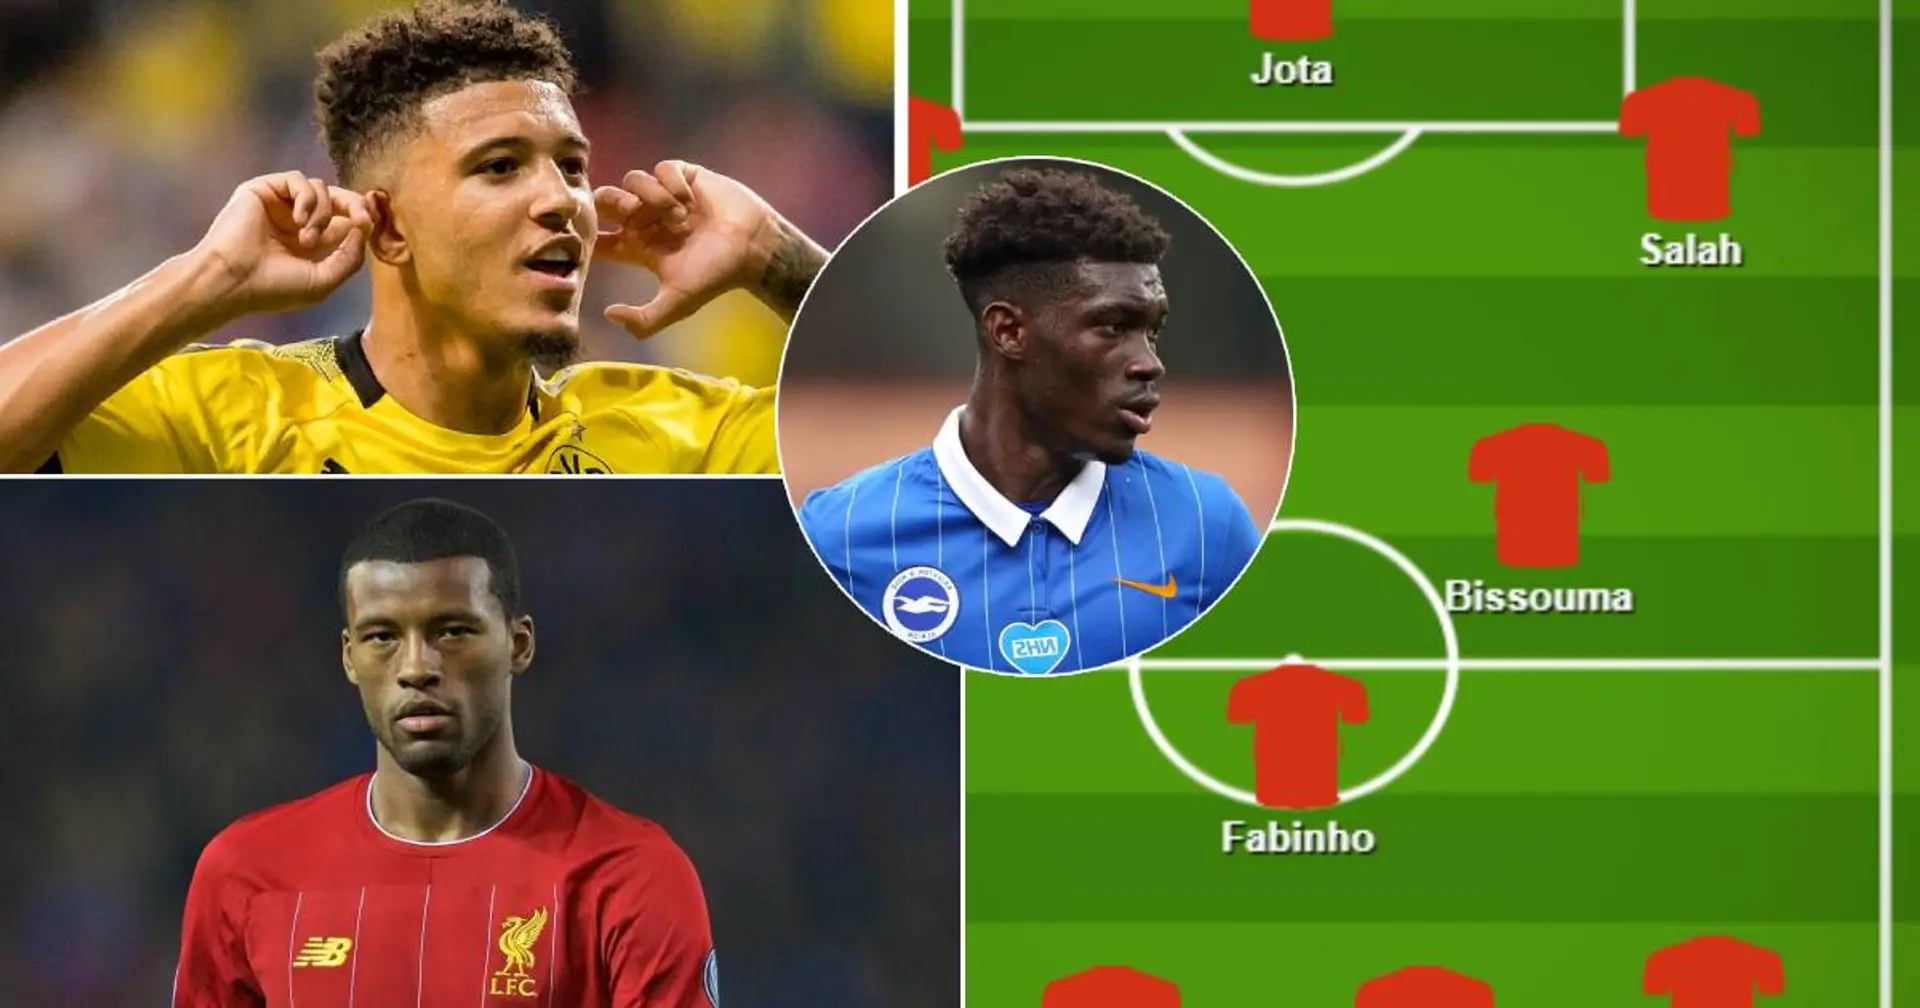 Sancho or Bissouma in? 4 ways Liverpool could line up in midfield next season with Wijnaldum's exit